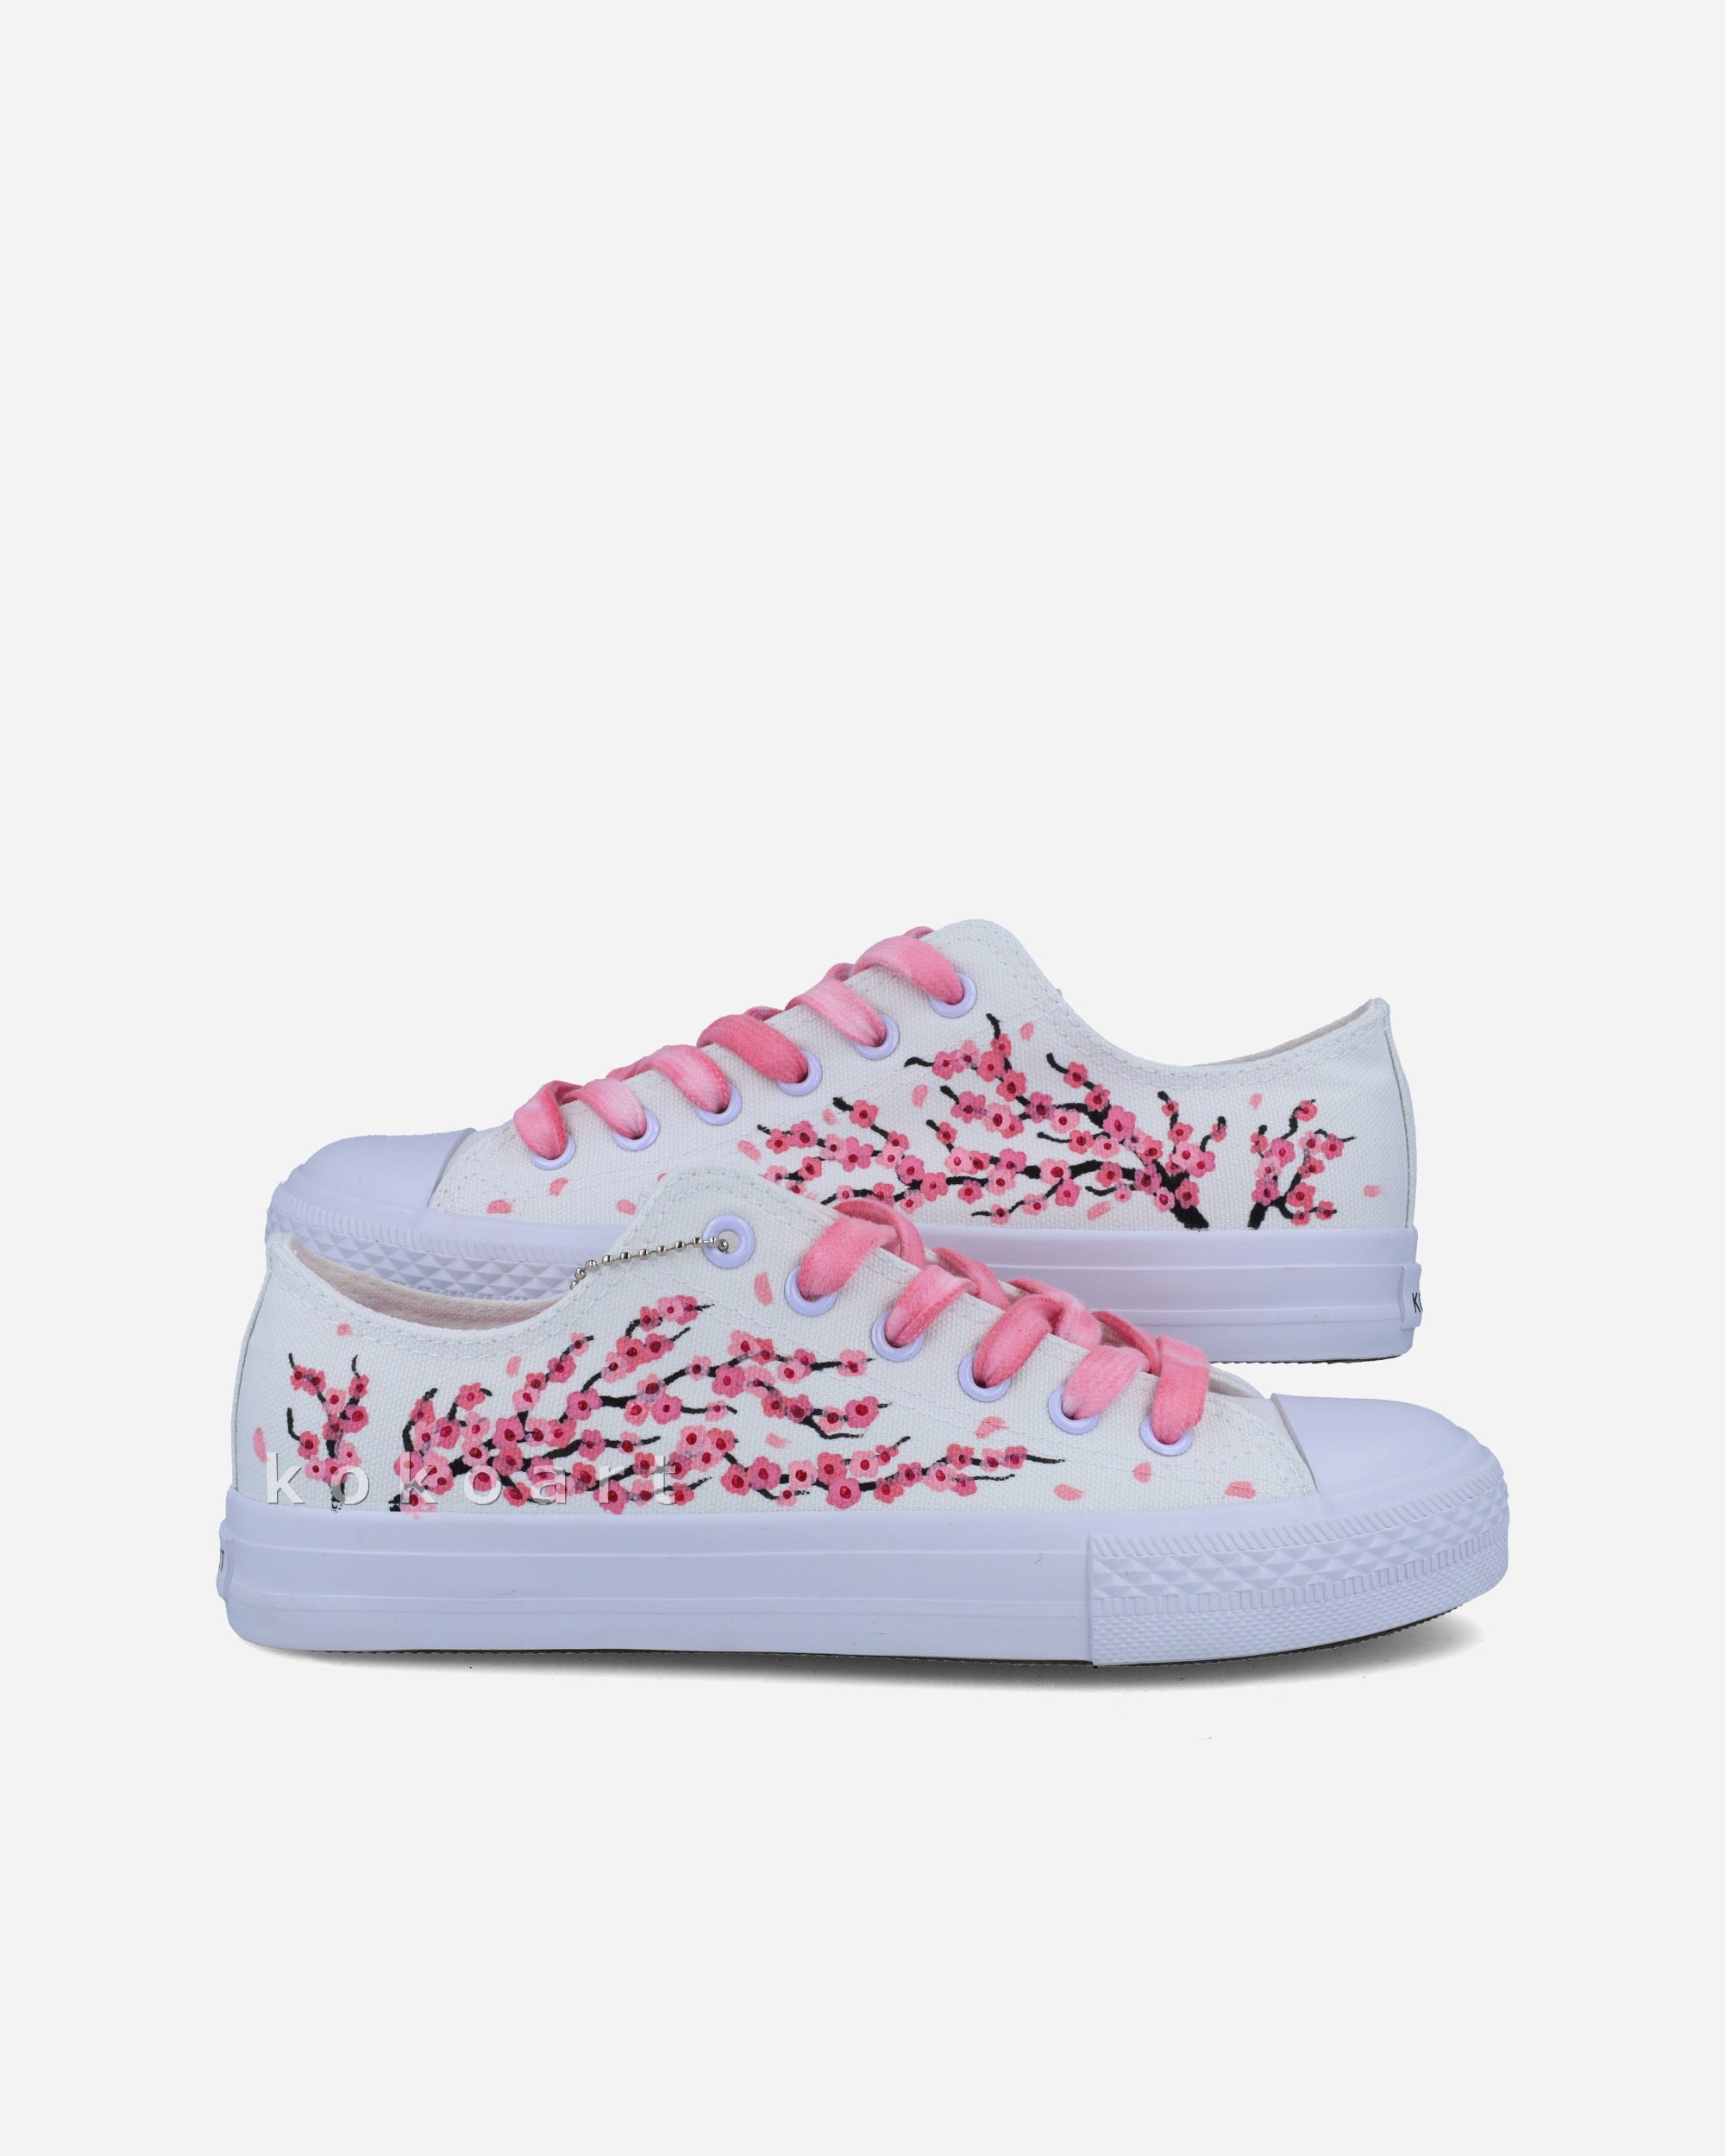 Cherry Blossom Hand Painted Shoes